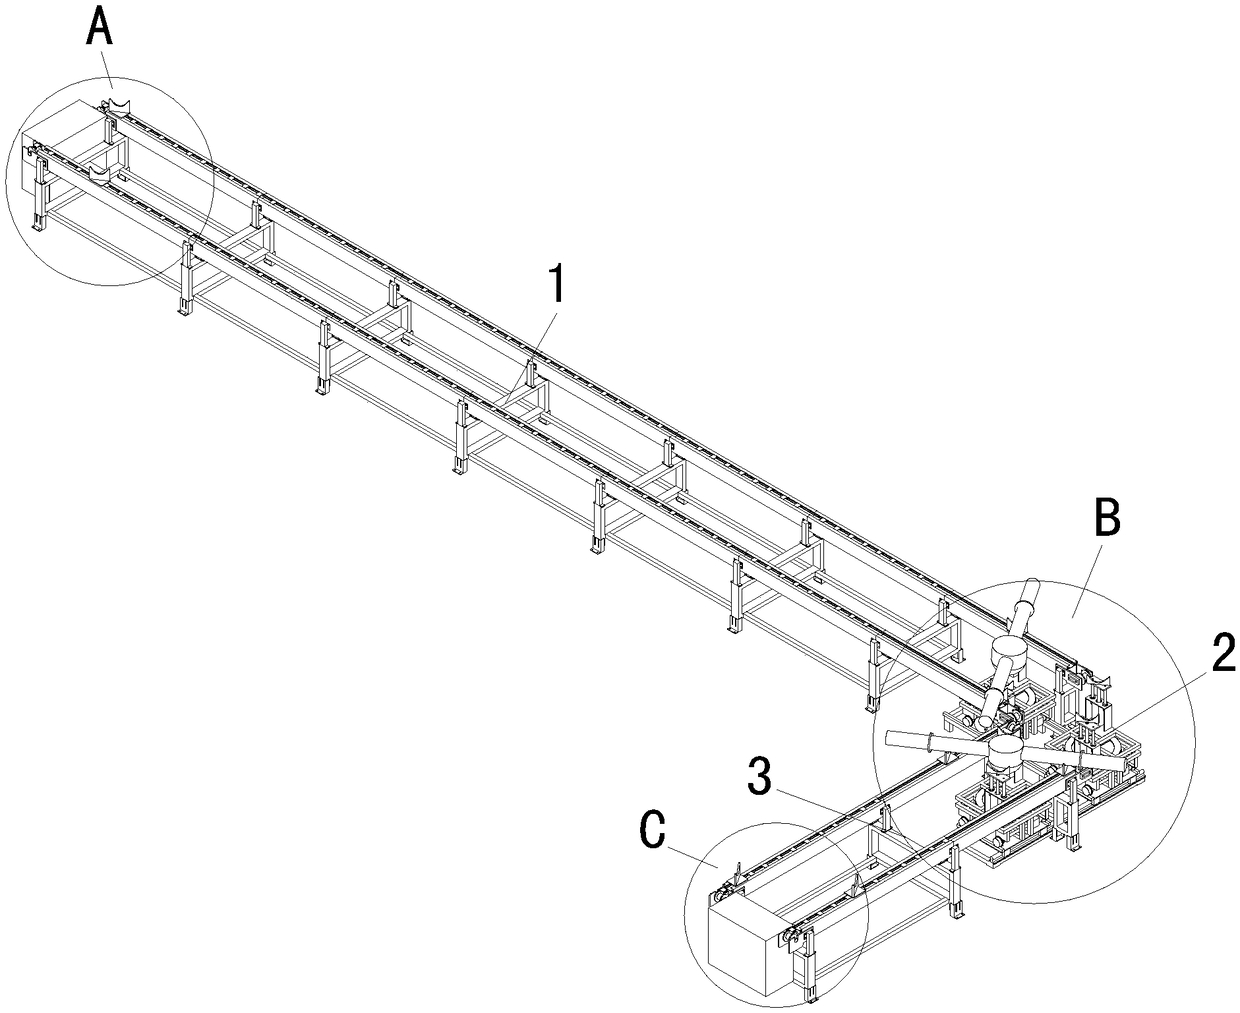 Axle housing conveying line